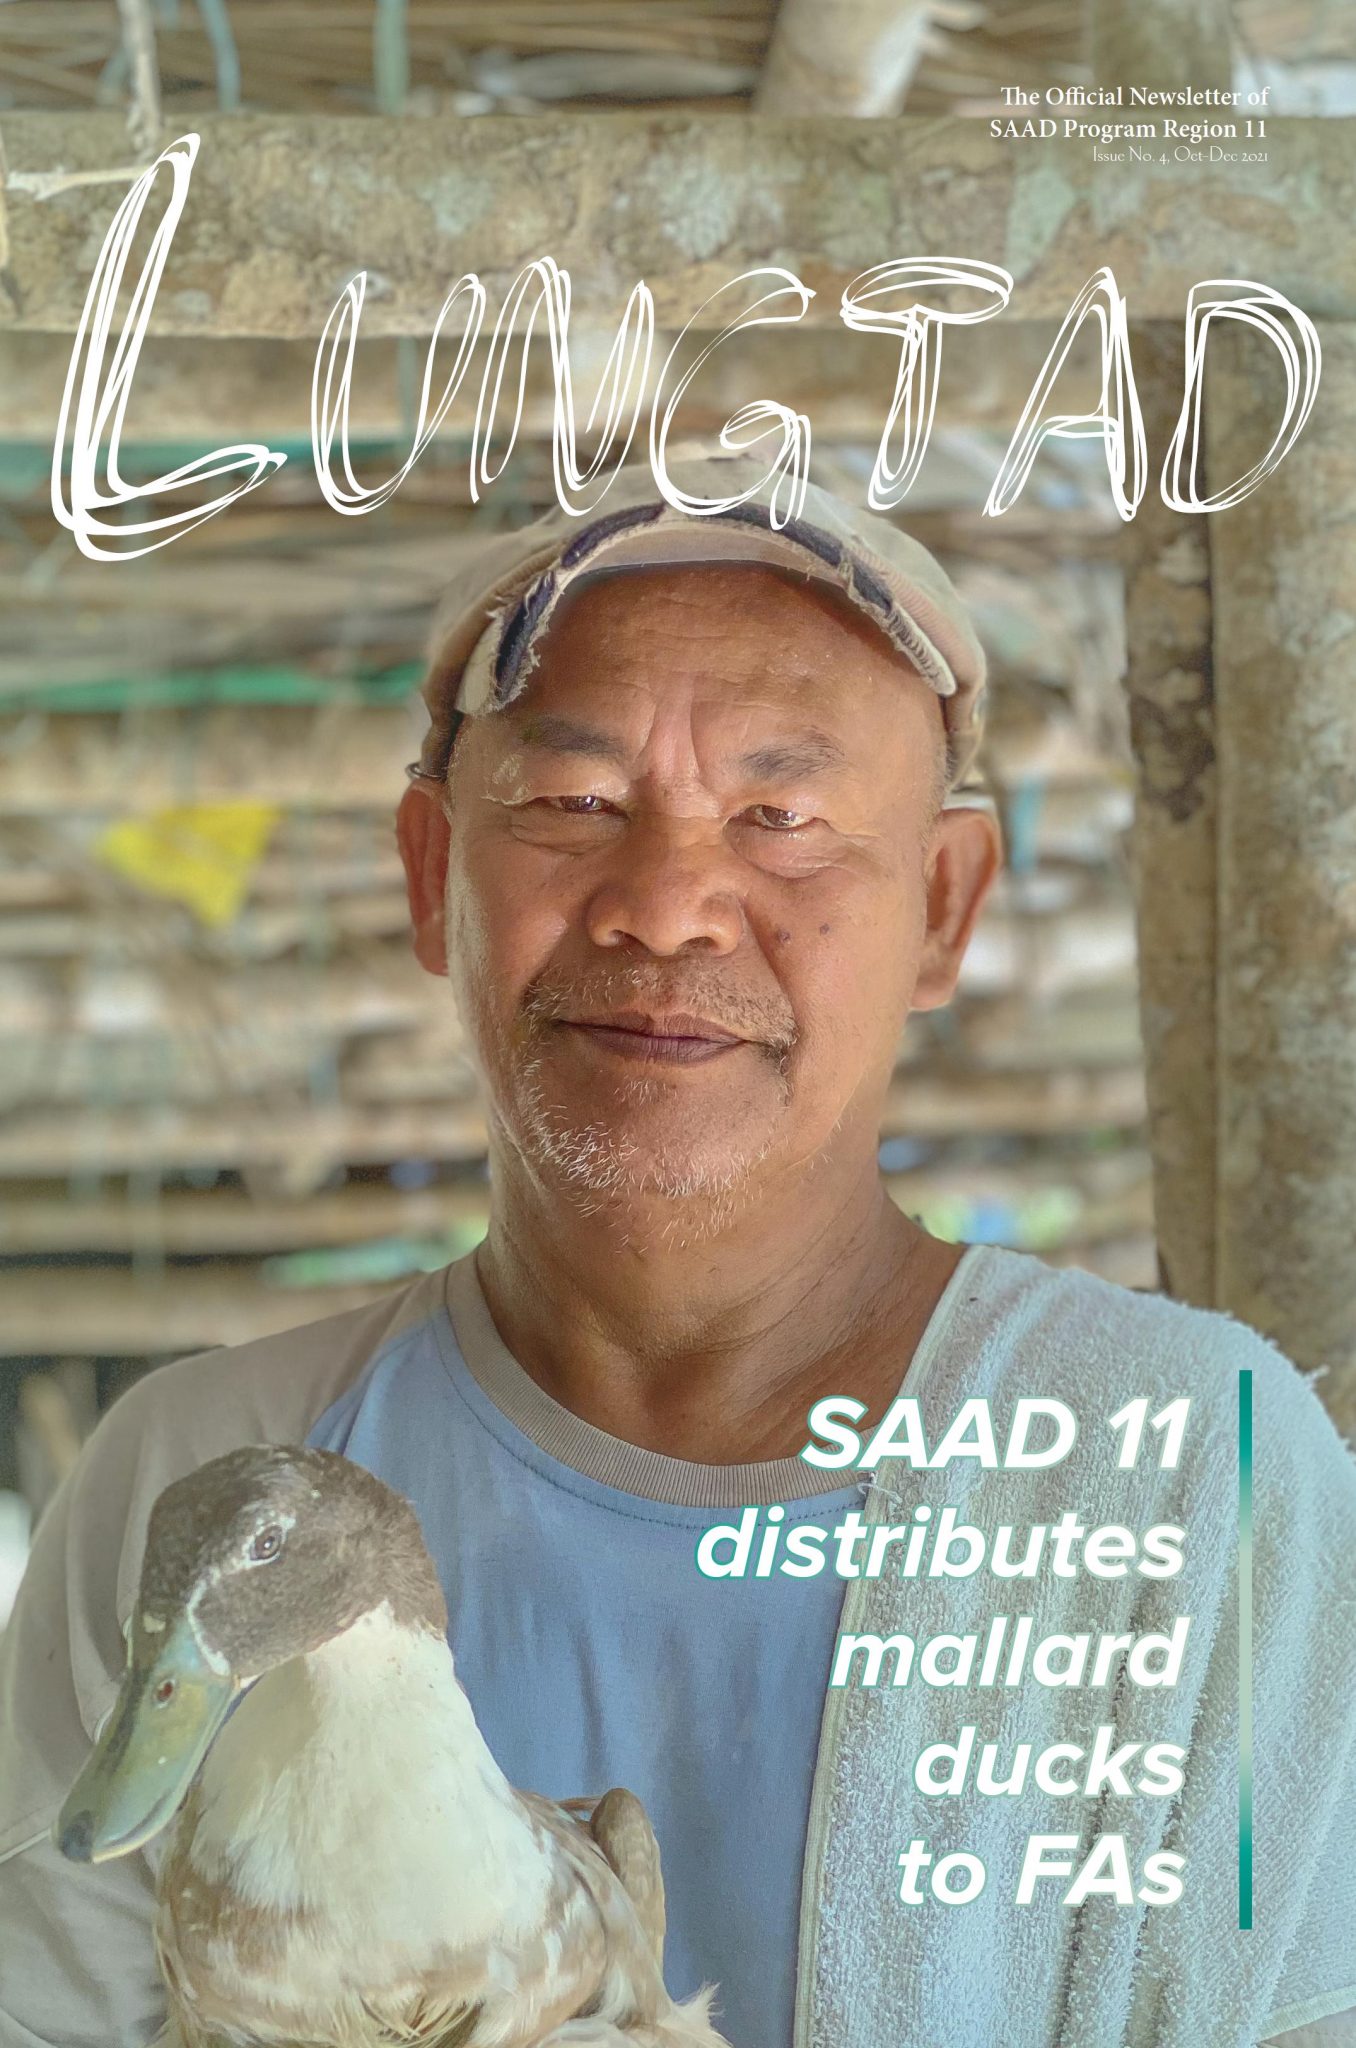 Lungtad Vol. 1 Issue No. 4